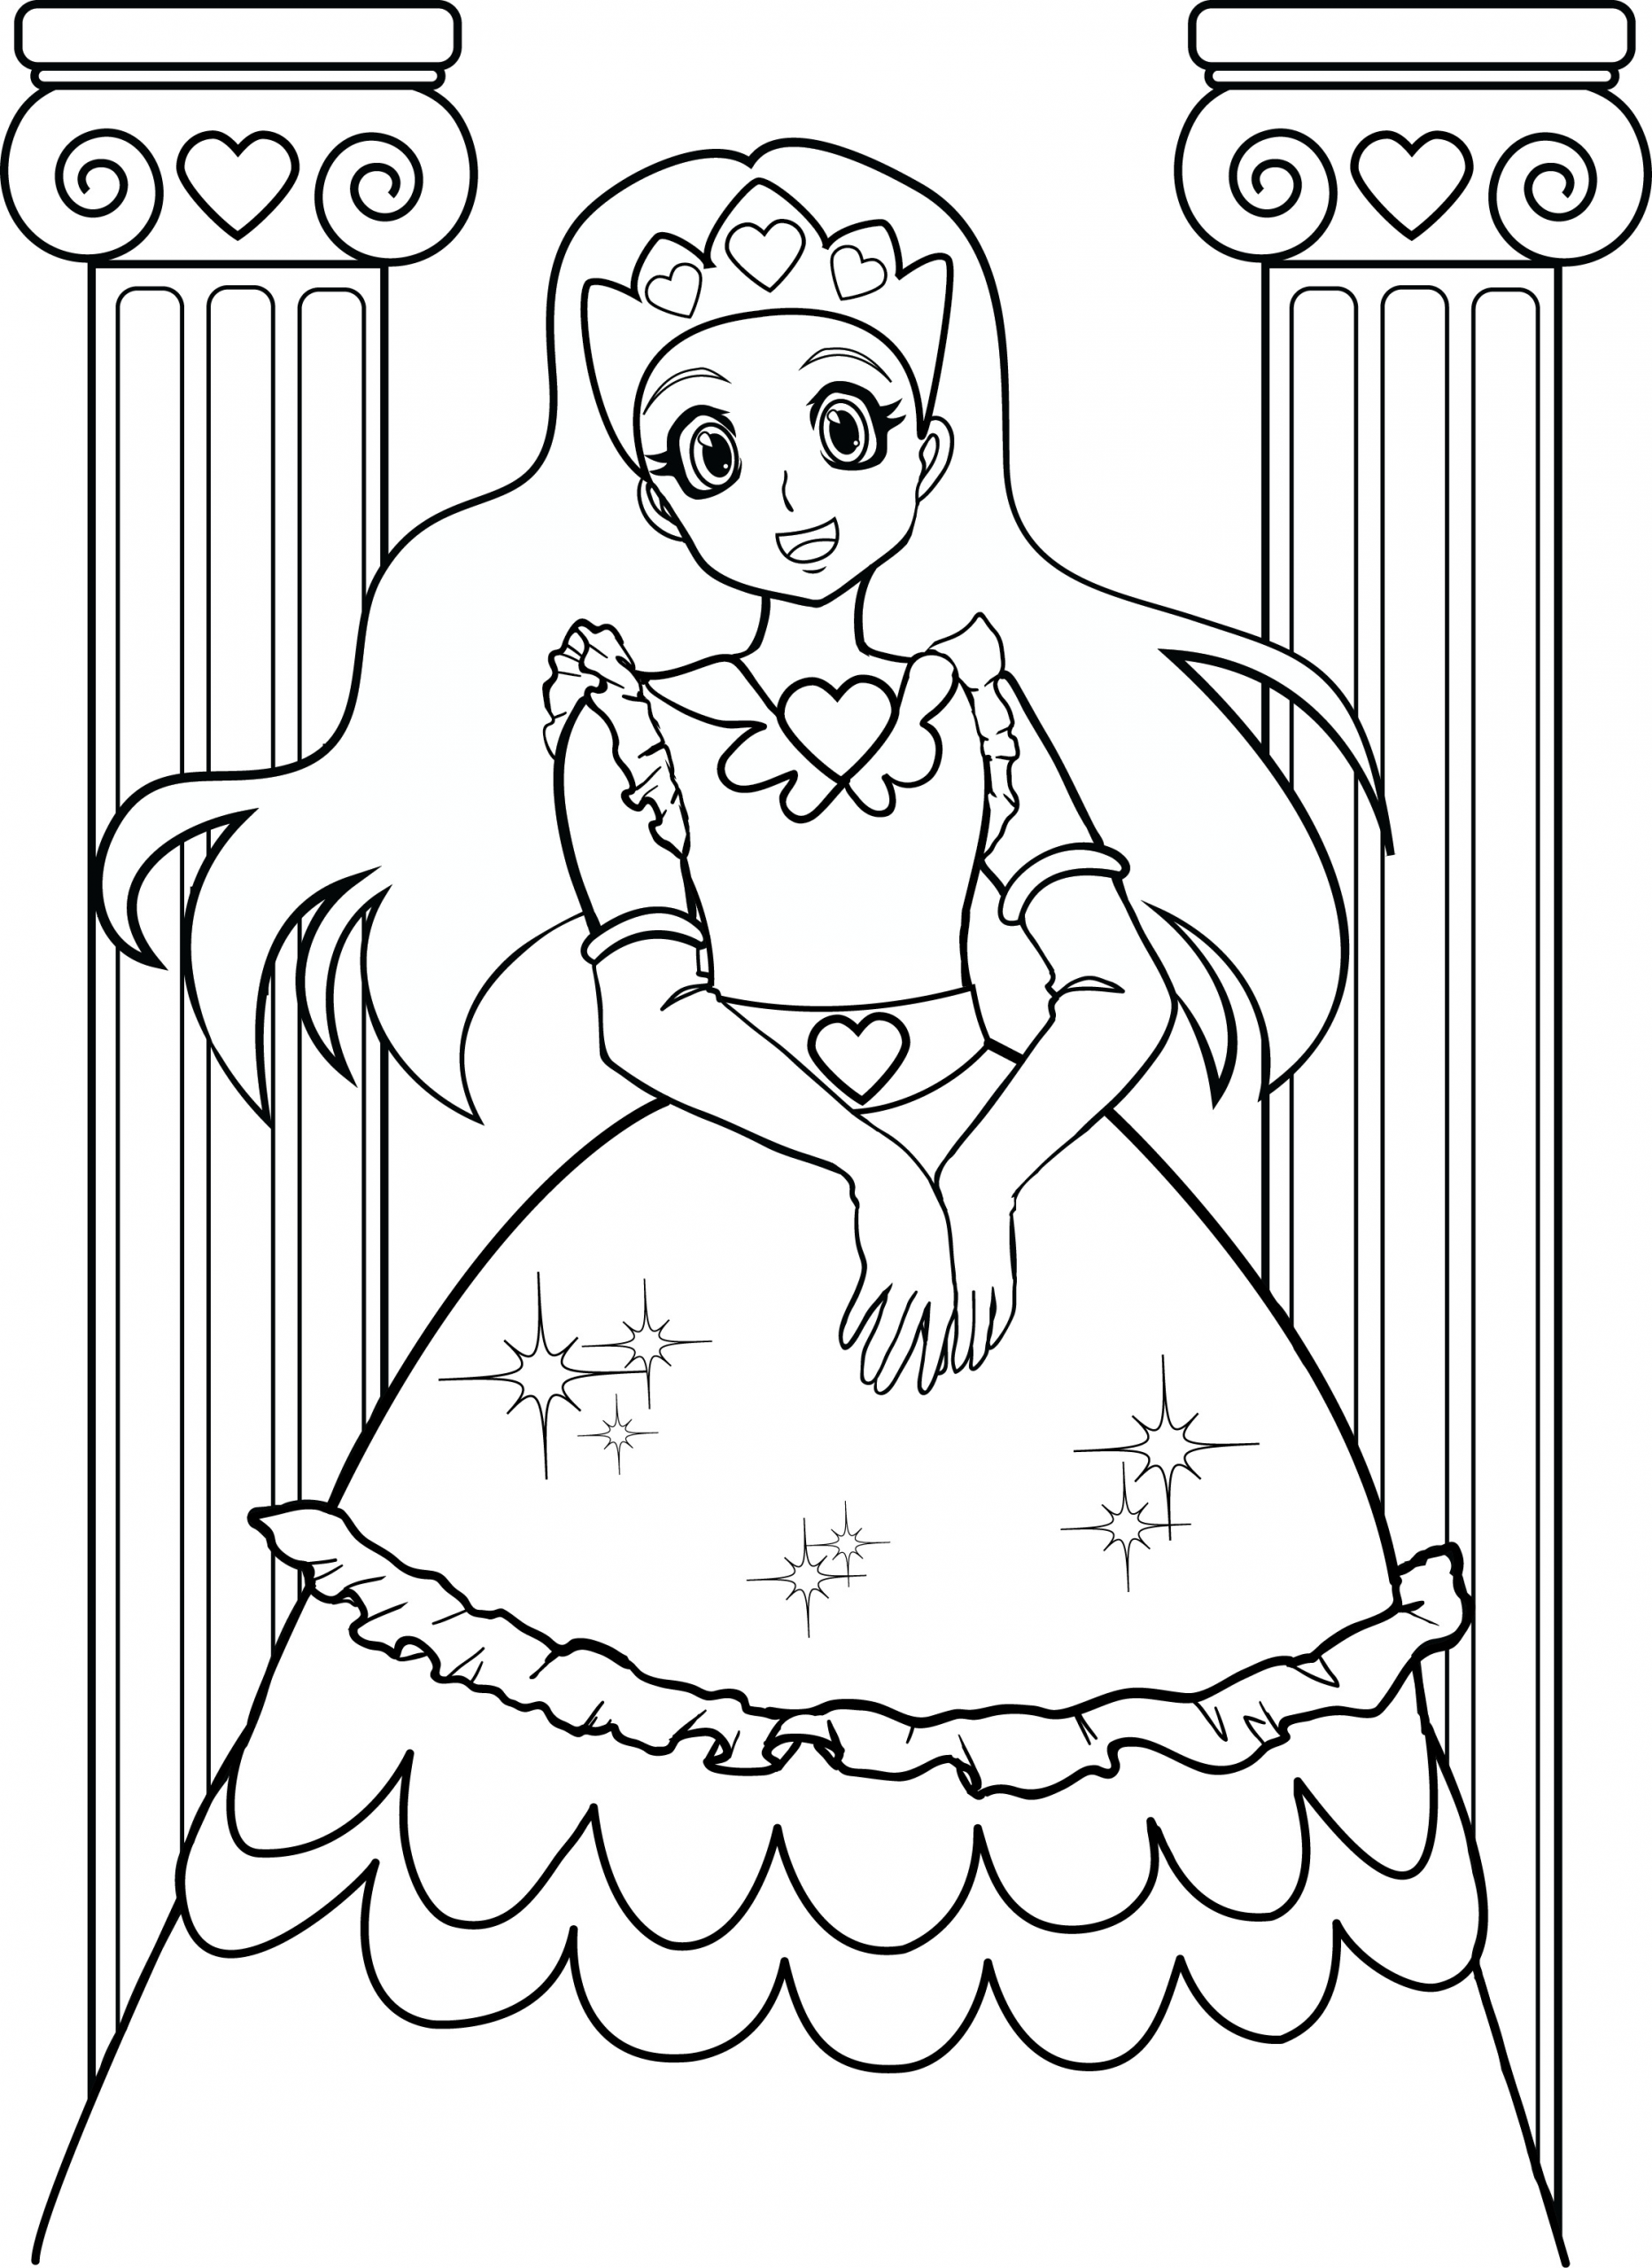 Online Printable Coloring Pages For Girls
 Coloring Pages For Girls 7